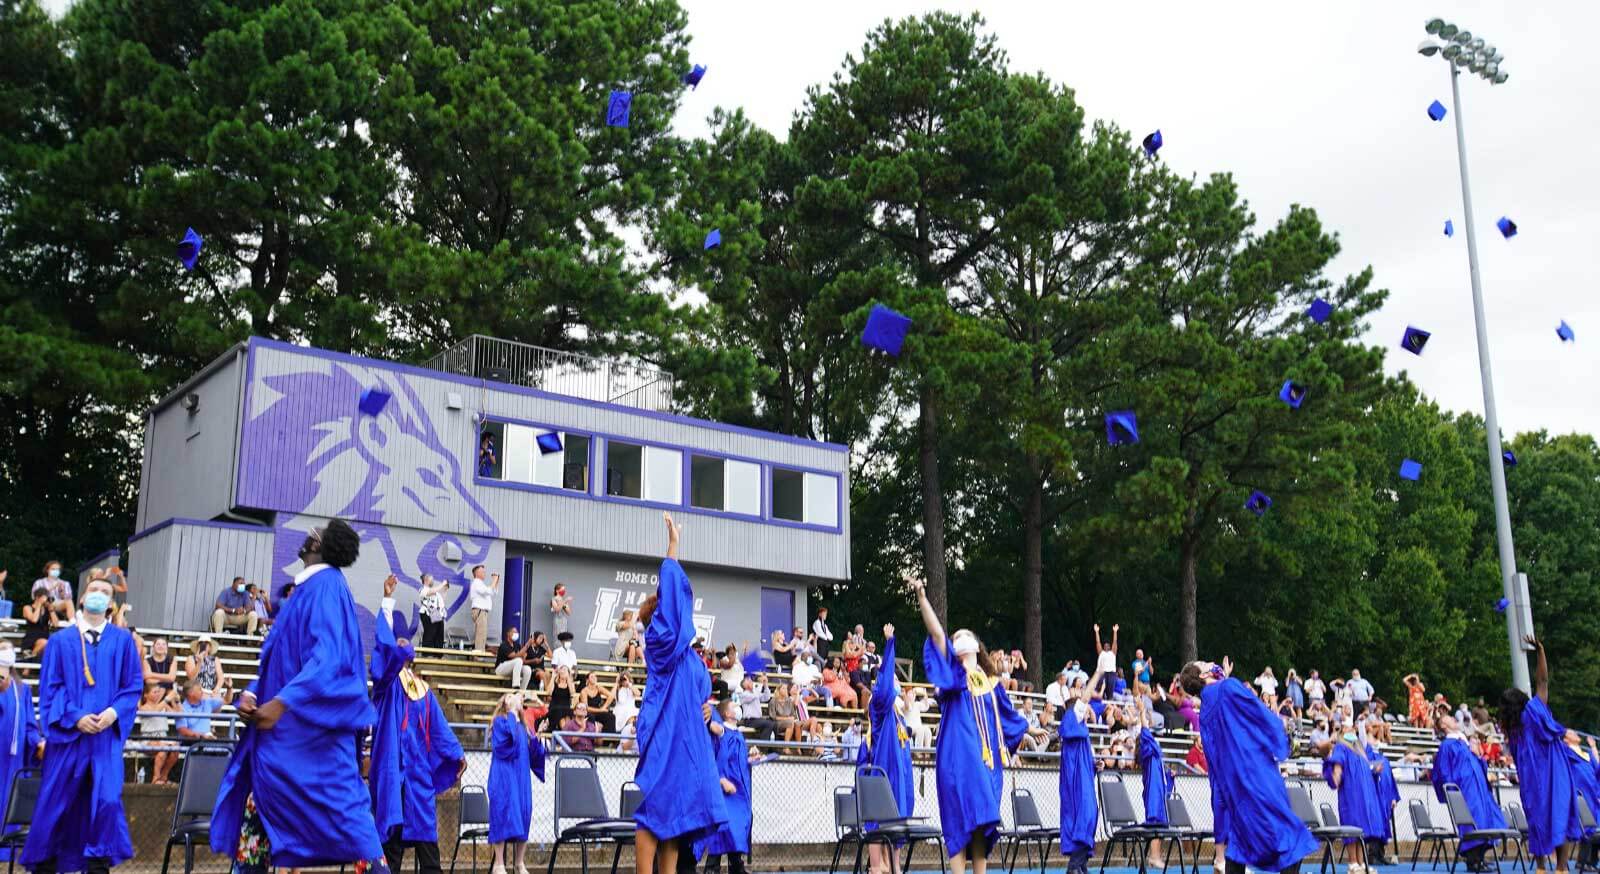 people at graduation throwing their caps in the air